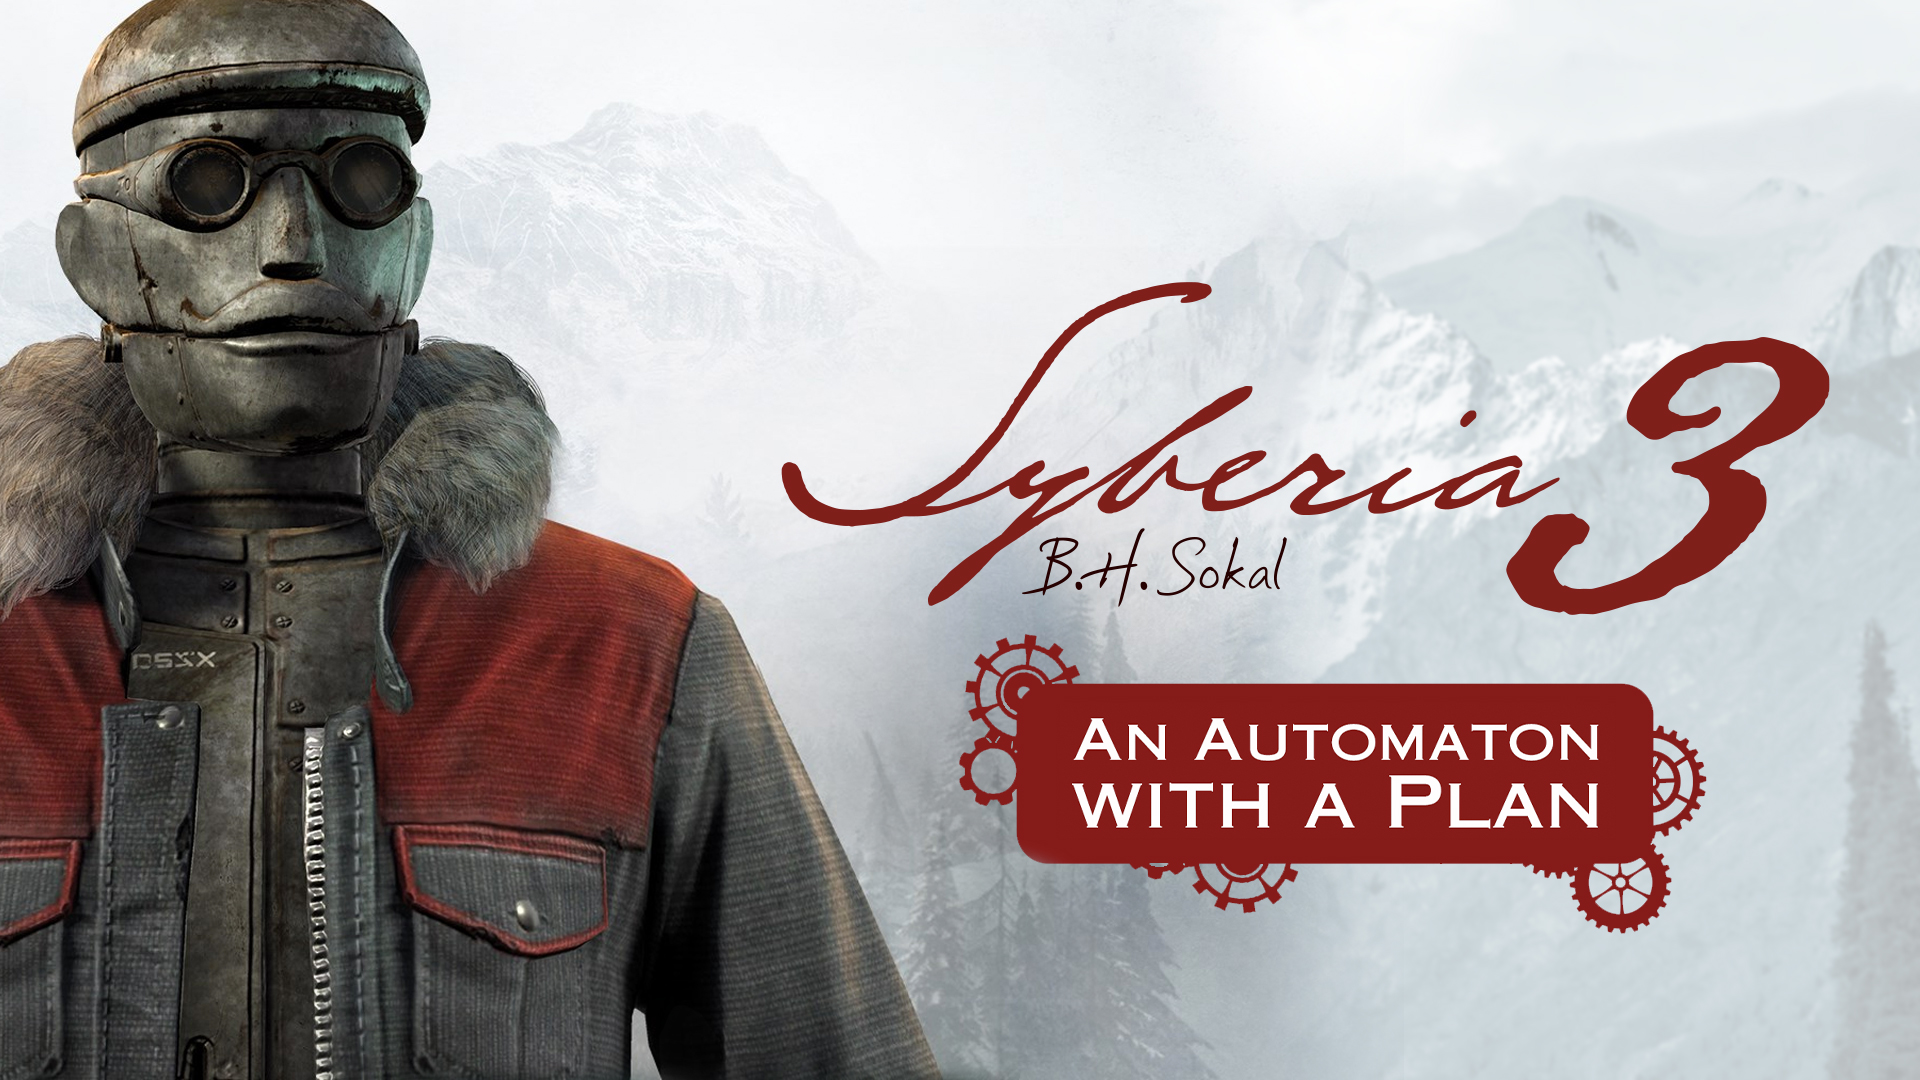 syberia 3 patch download